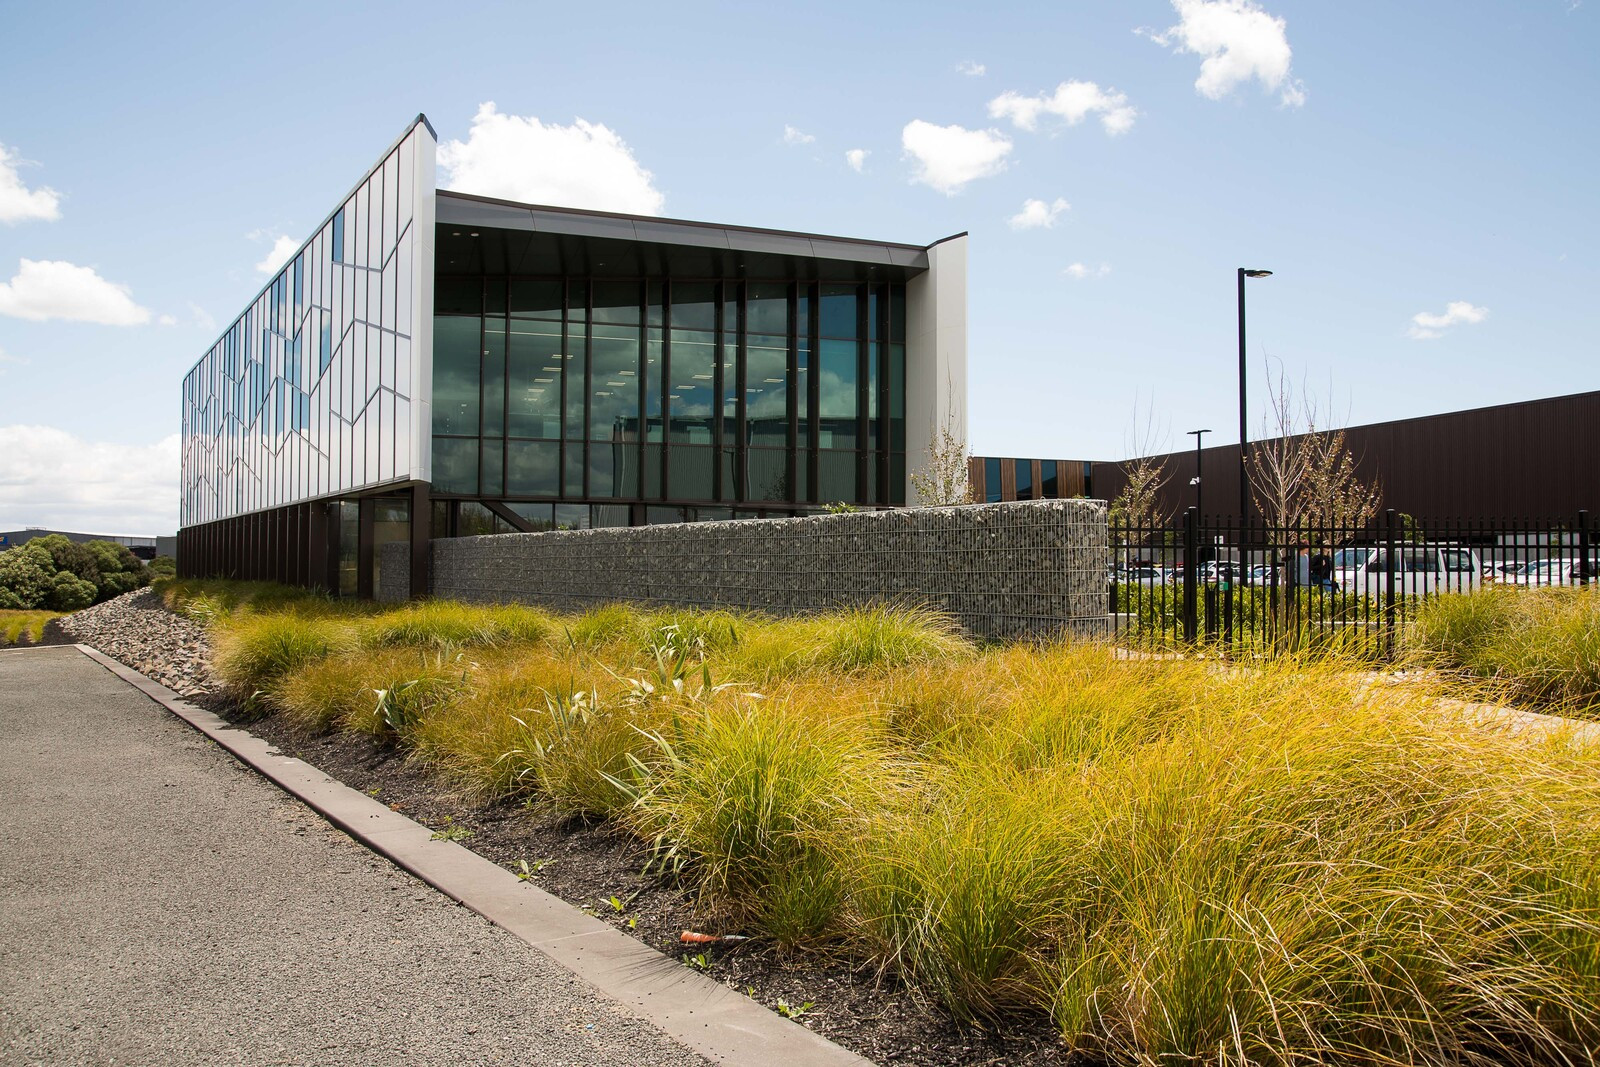 Large building with patterned glass exterior contrasting with white panels, in front of grass bushes